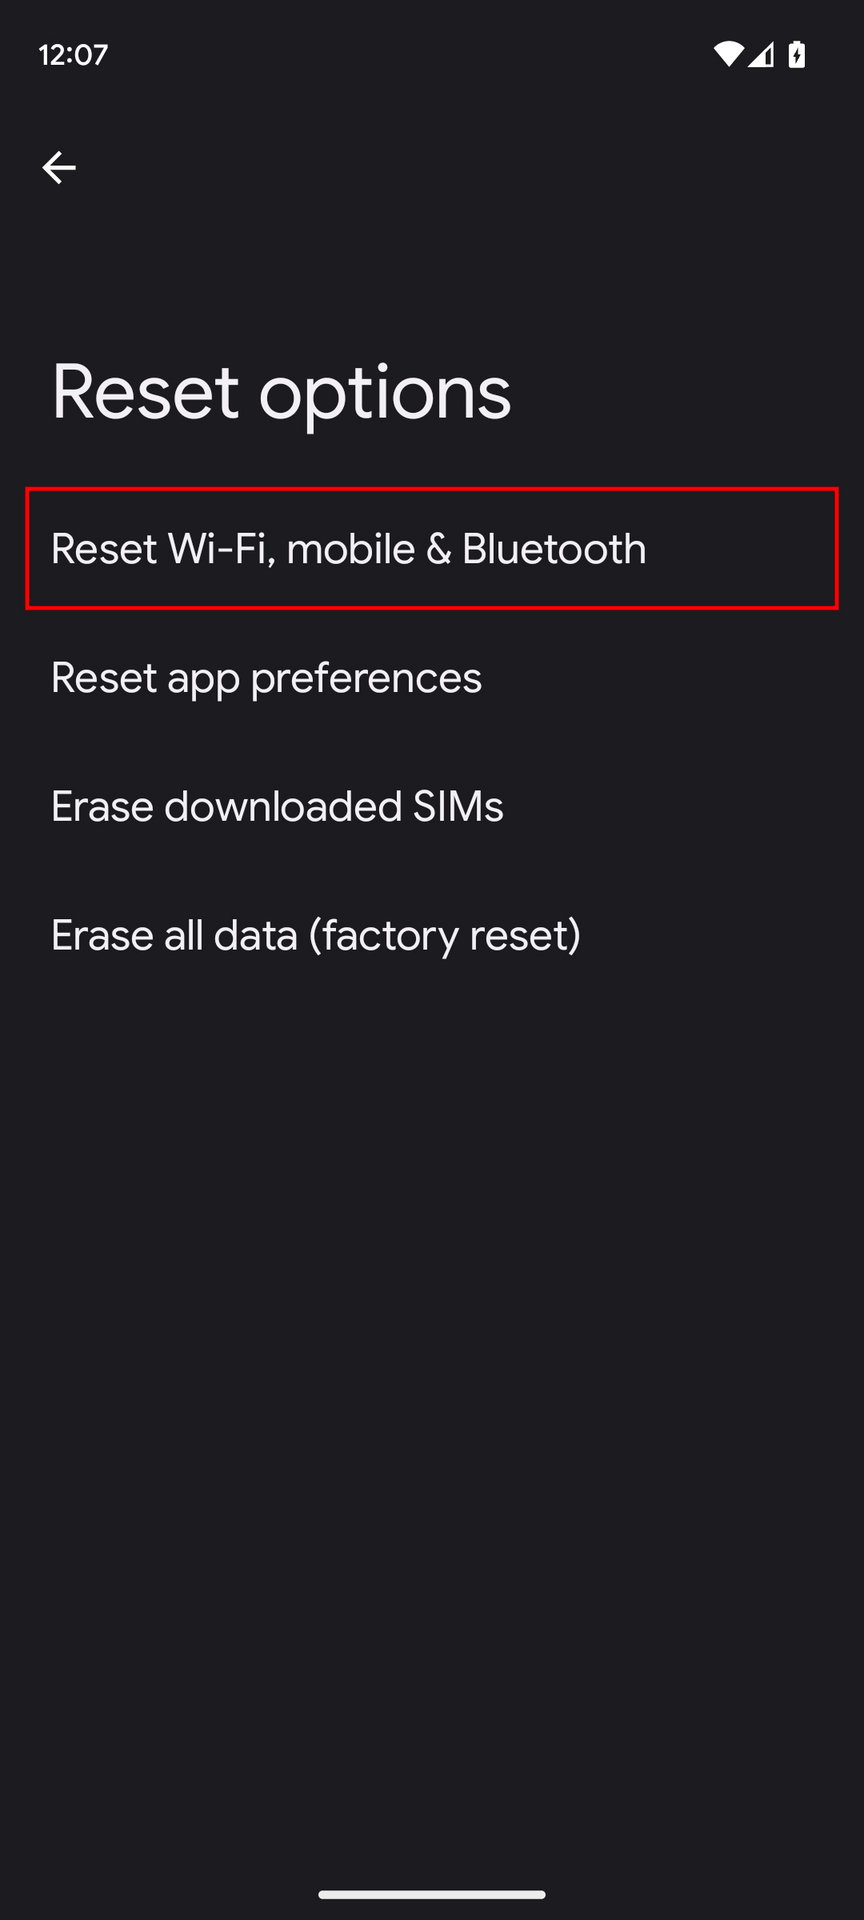 How to reset network settings on Android 3 - Fixing mobile data issues